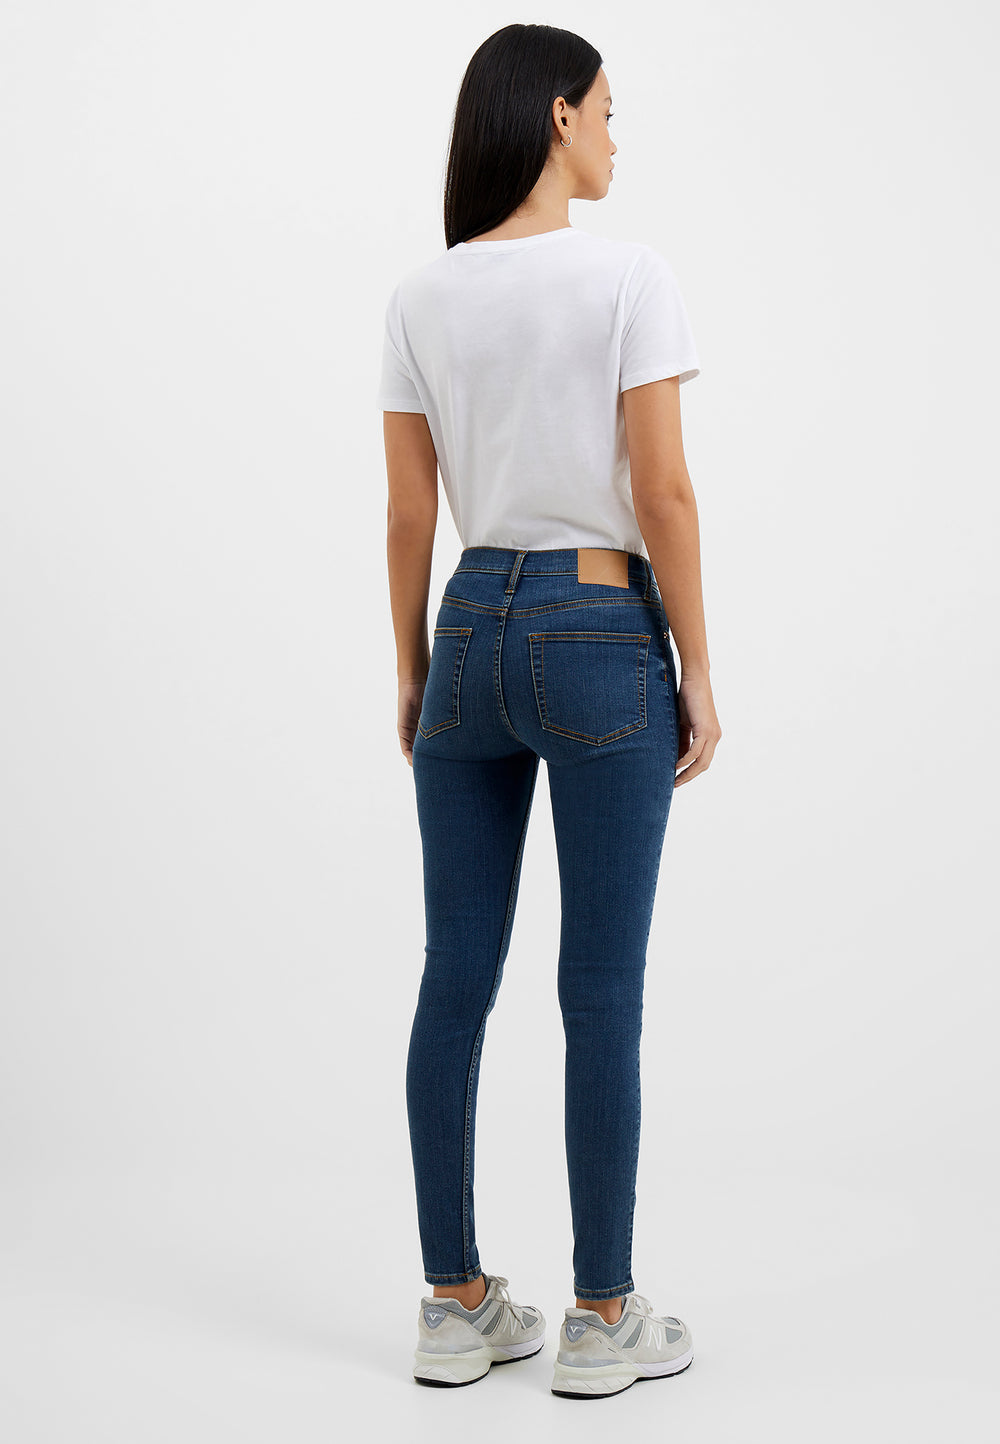 Rebound Response Skinny Jeans 30 Inch VINTAGE | French Connection UK